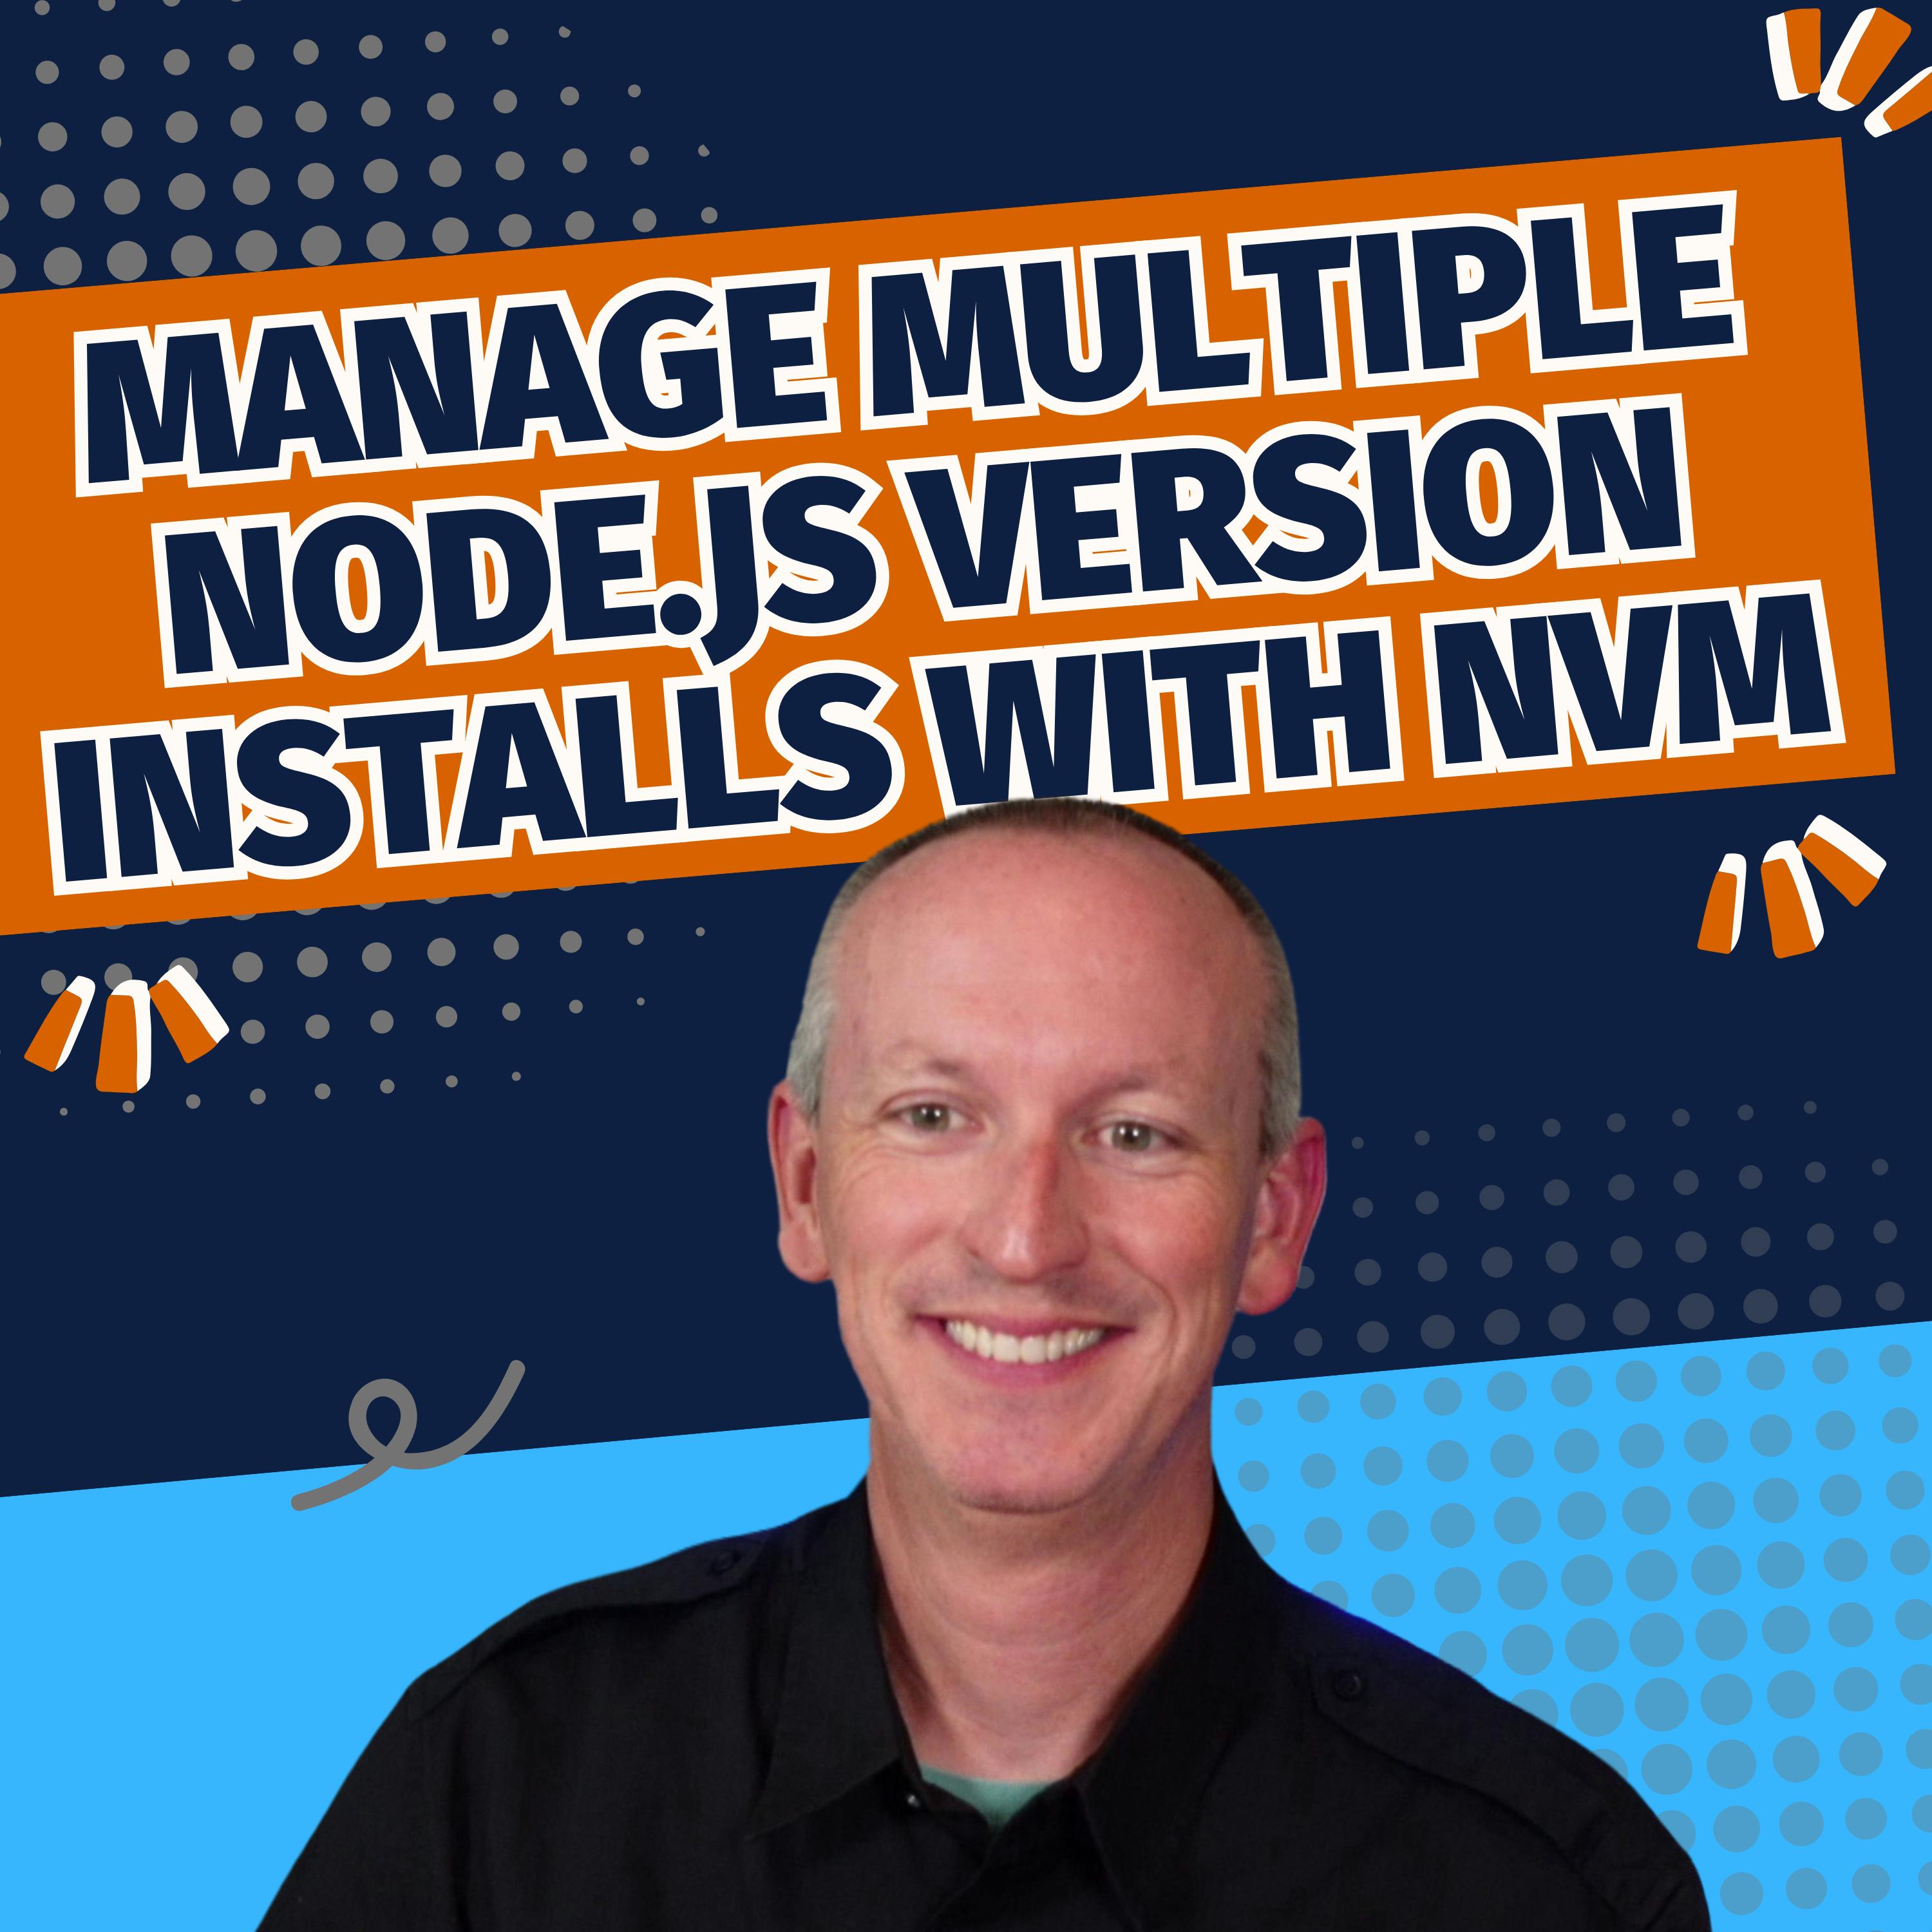 Learn how using a node version manager (NVM) is a fantastic tool for developers who rely on Node.js... including SharePoint Framework (SPFx) developers!